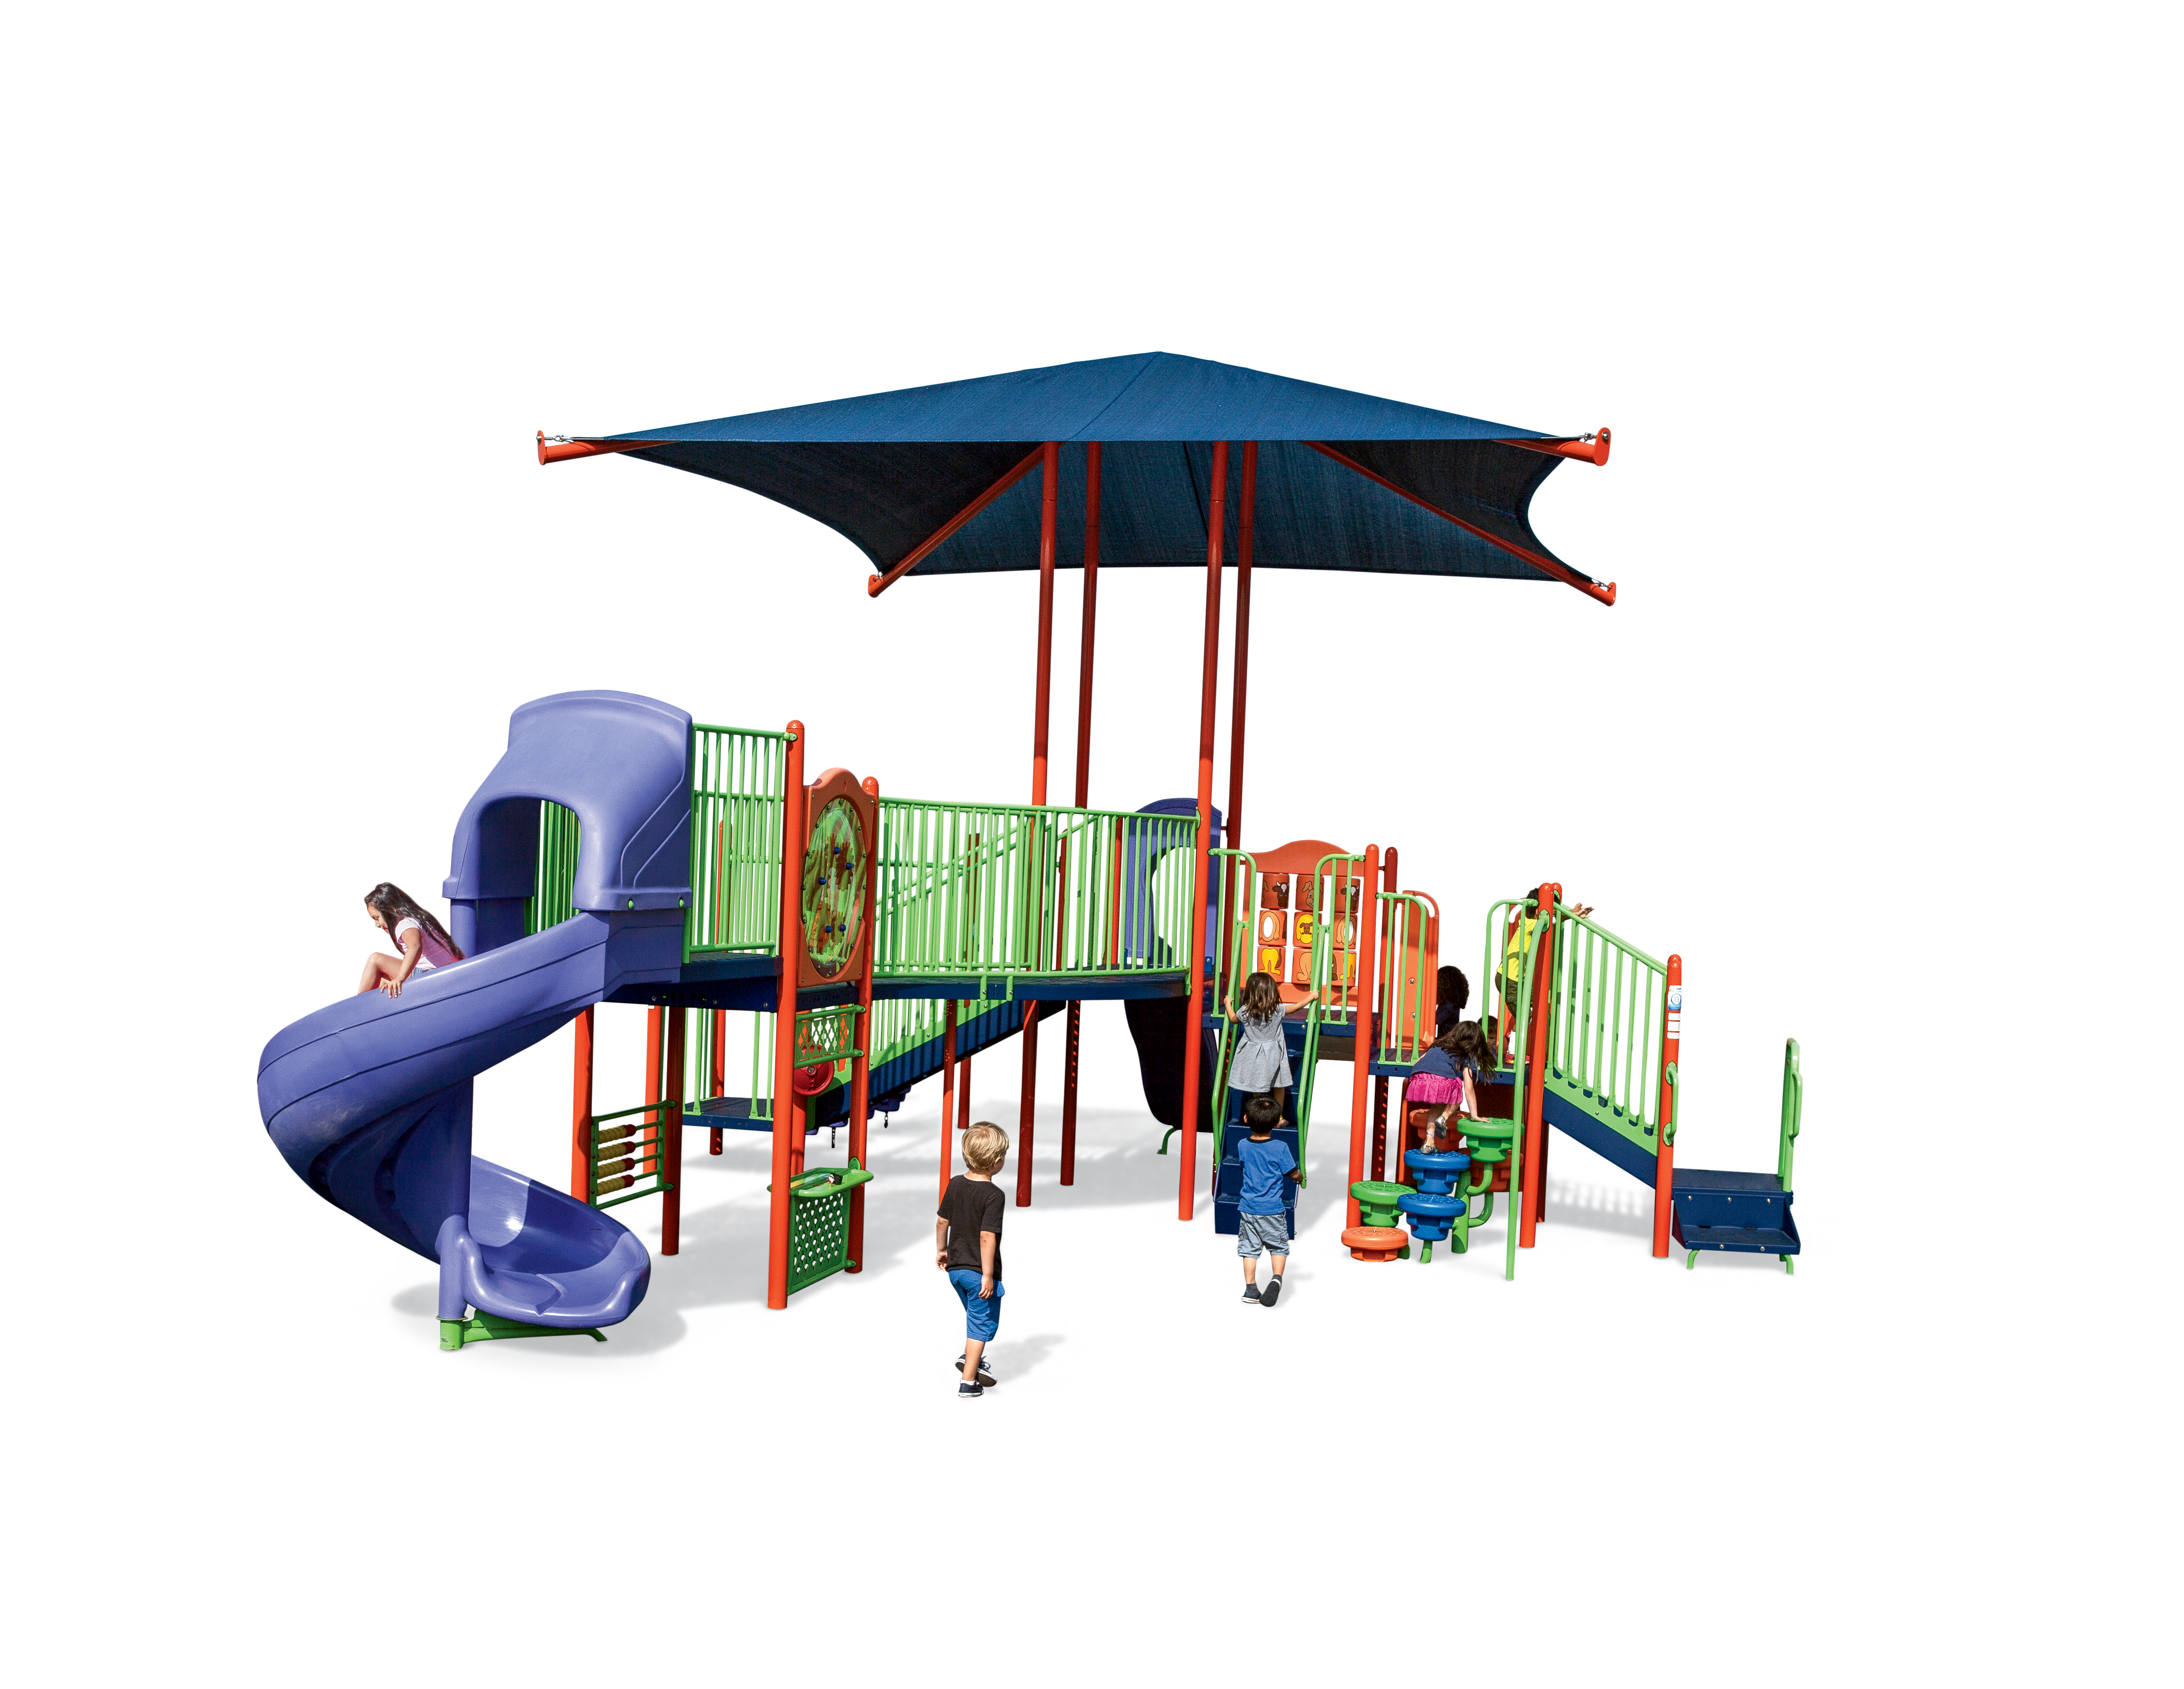 A Playbuilders playground with a large shade.